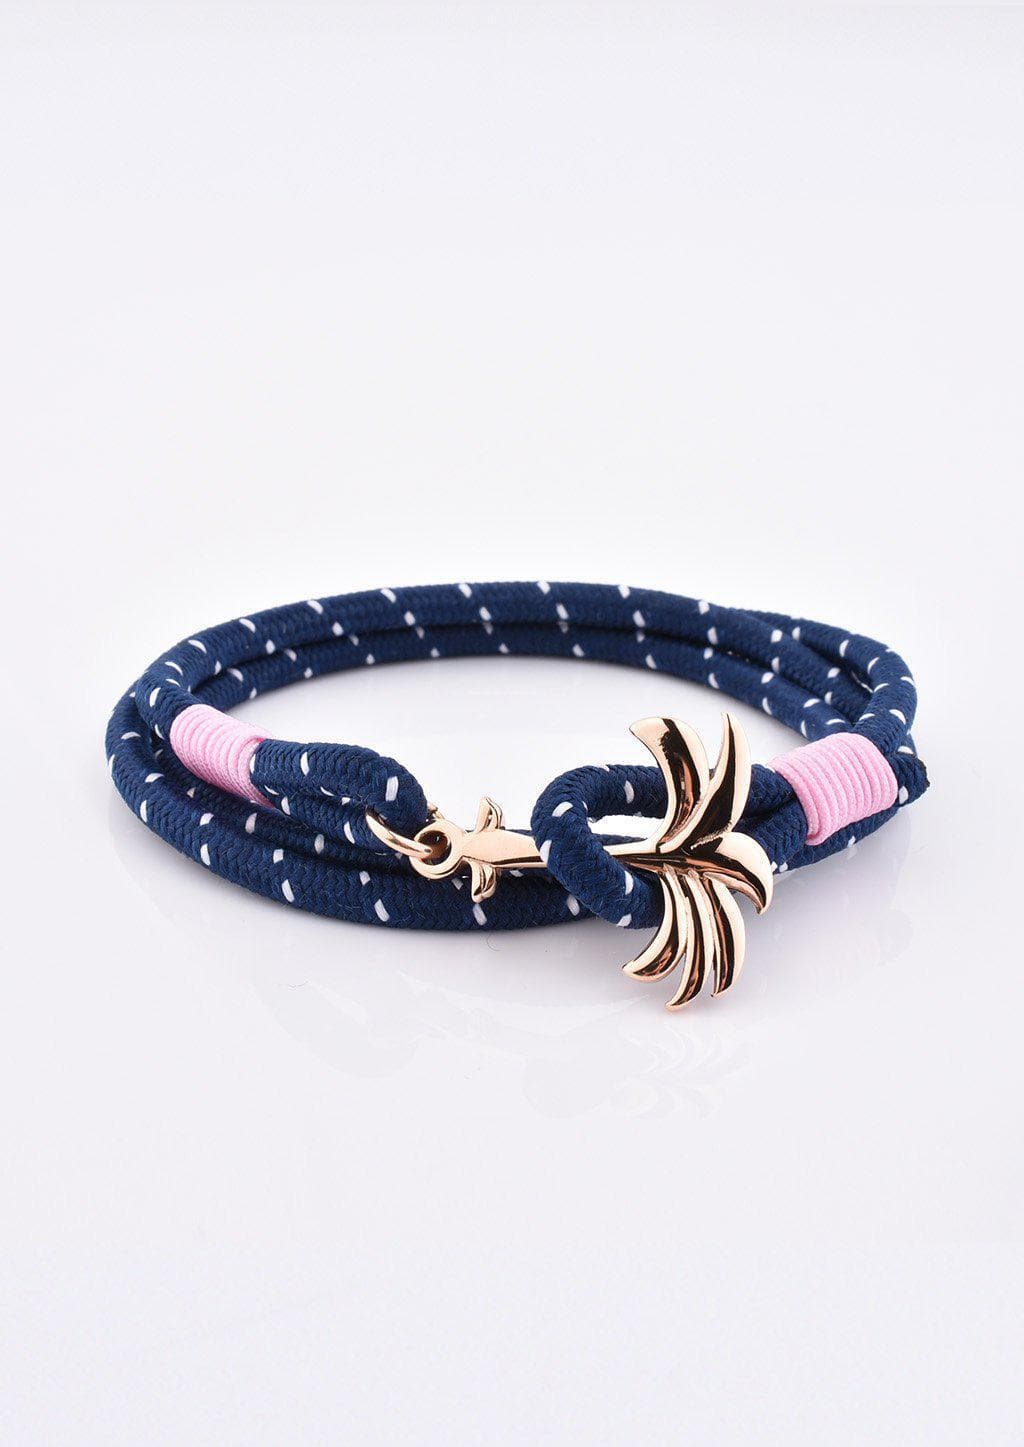 Daybreak - Triple - Season two Palm anchor bracelet with pink and blue nylon band.